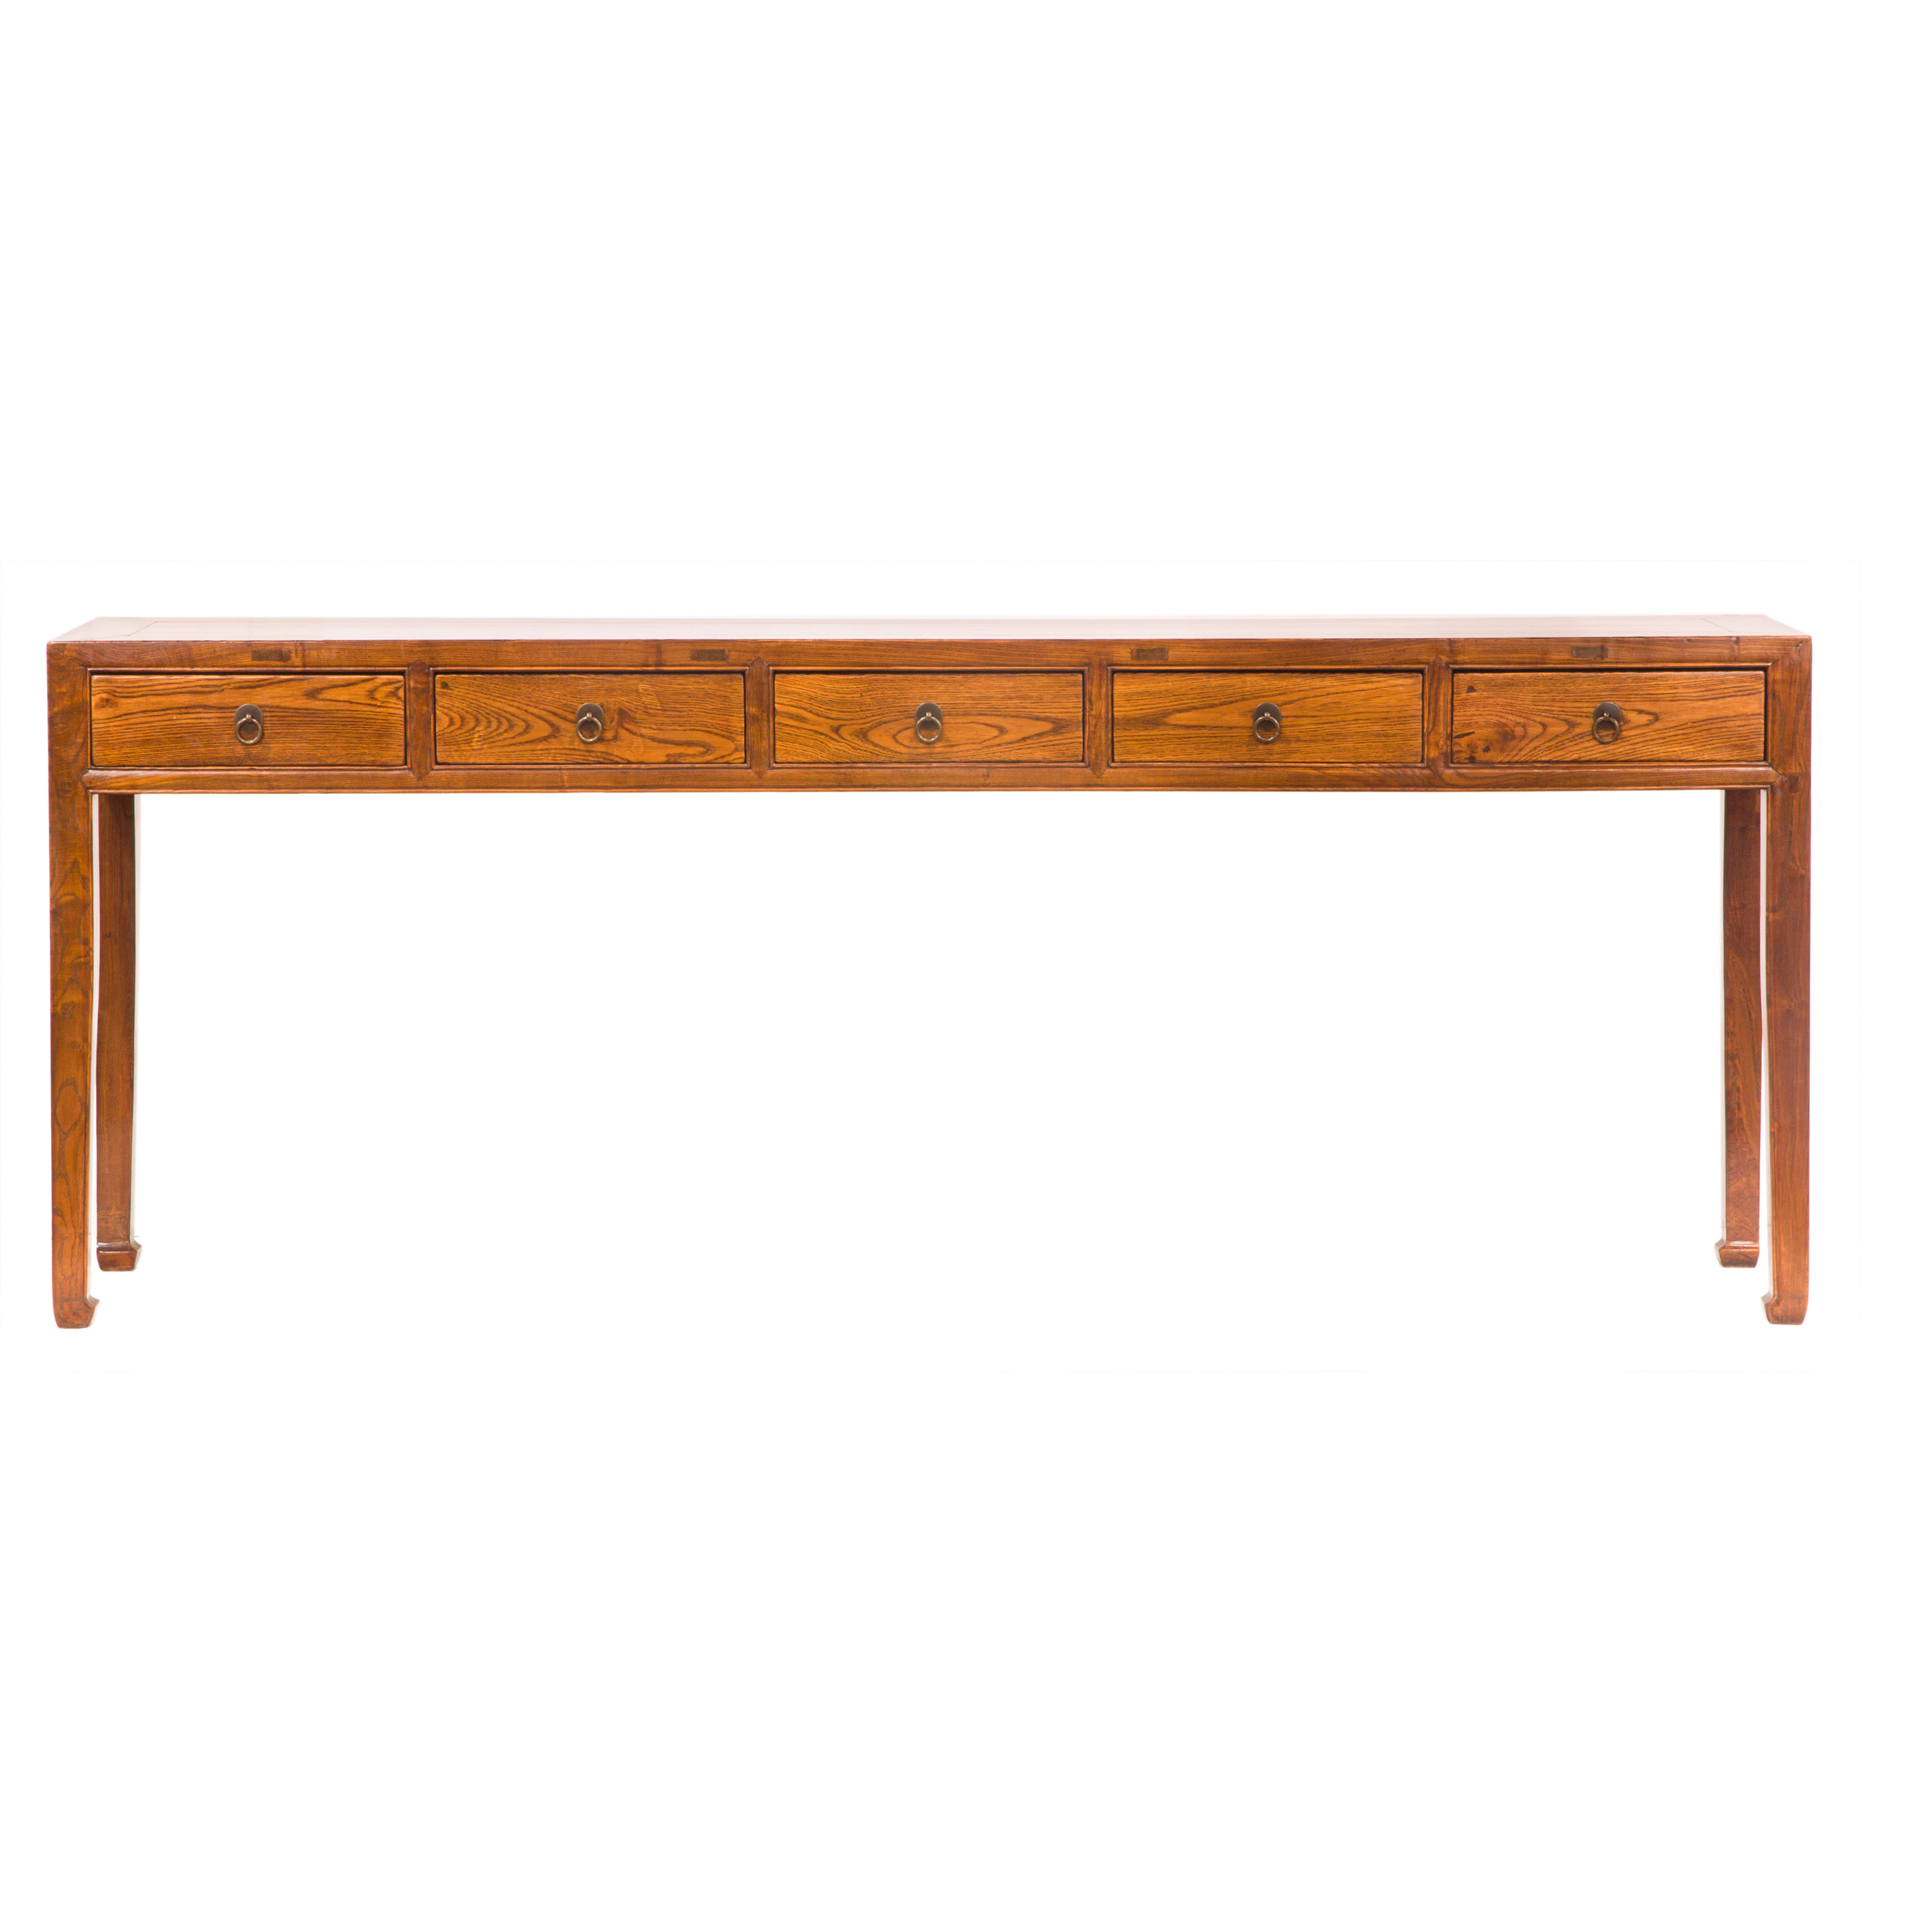 CHINESE ELM CONSOLE TABLE Chinese 3a37ed